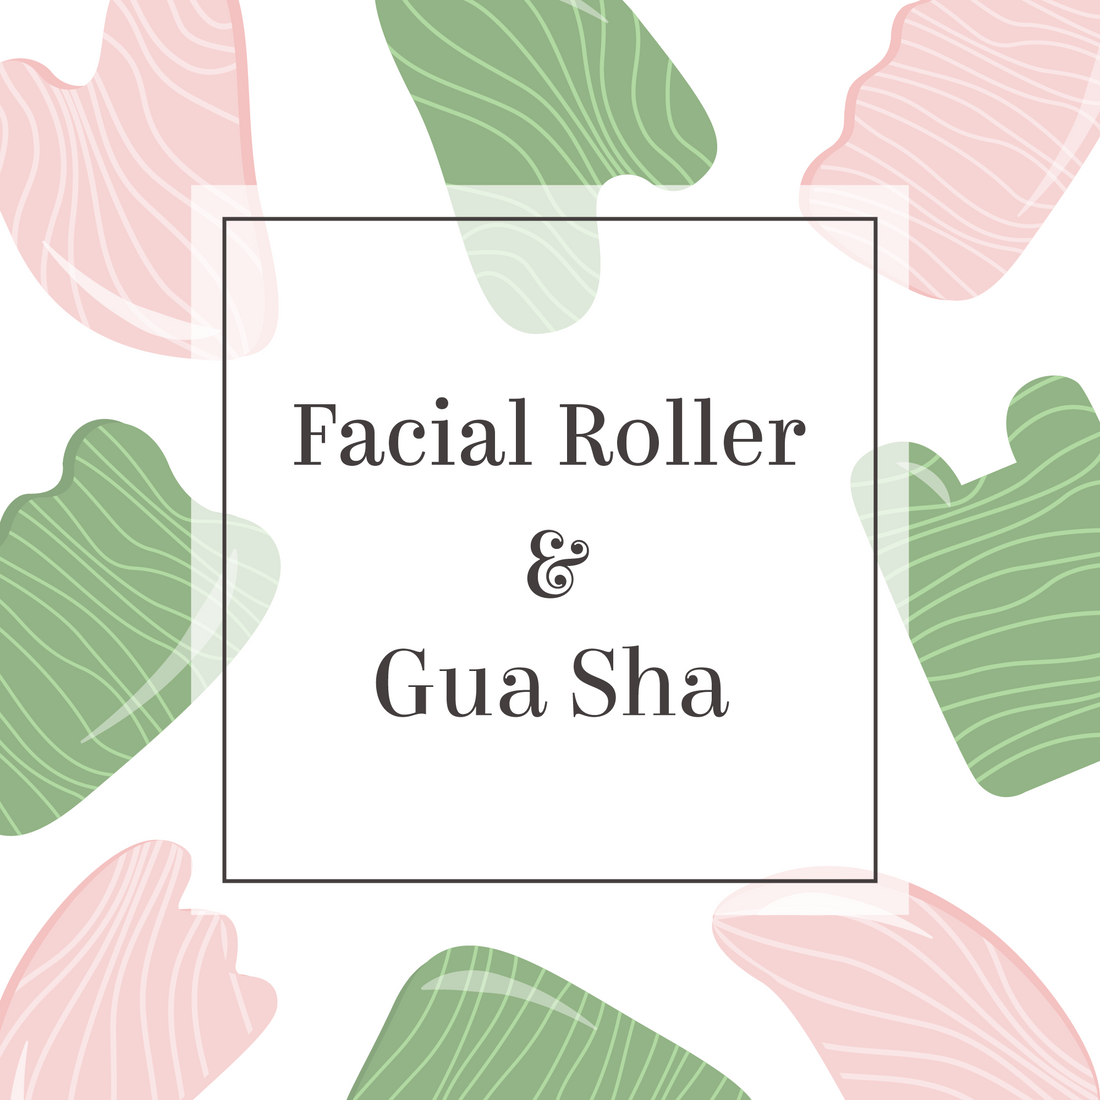 Facial Roller and Gua Sha: Their Spiritual Significance and Instructional Guide